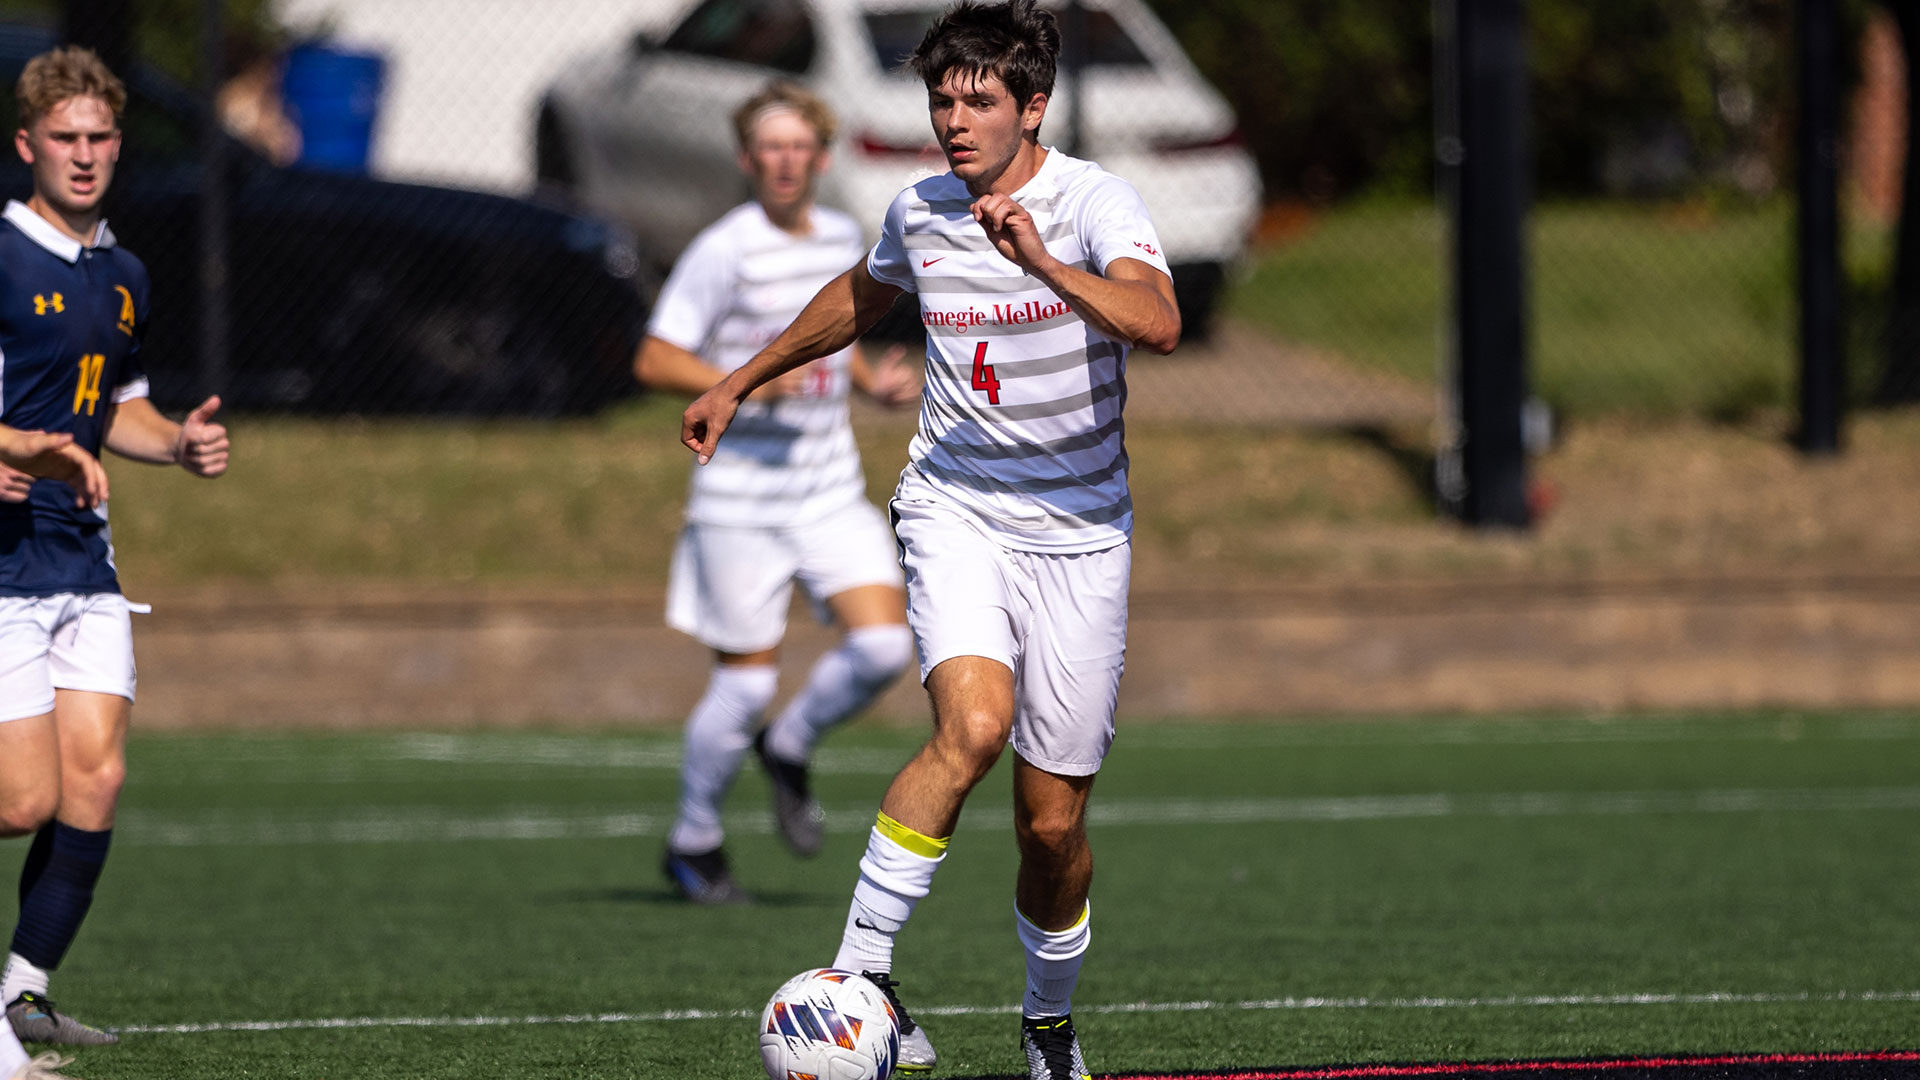 men's soccer player wearing white uniform dribbling ball with outside of right foot